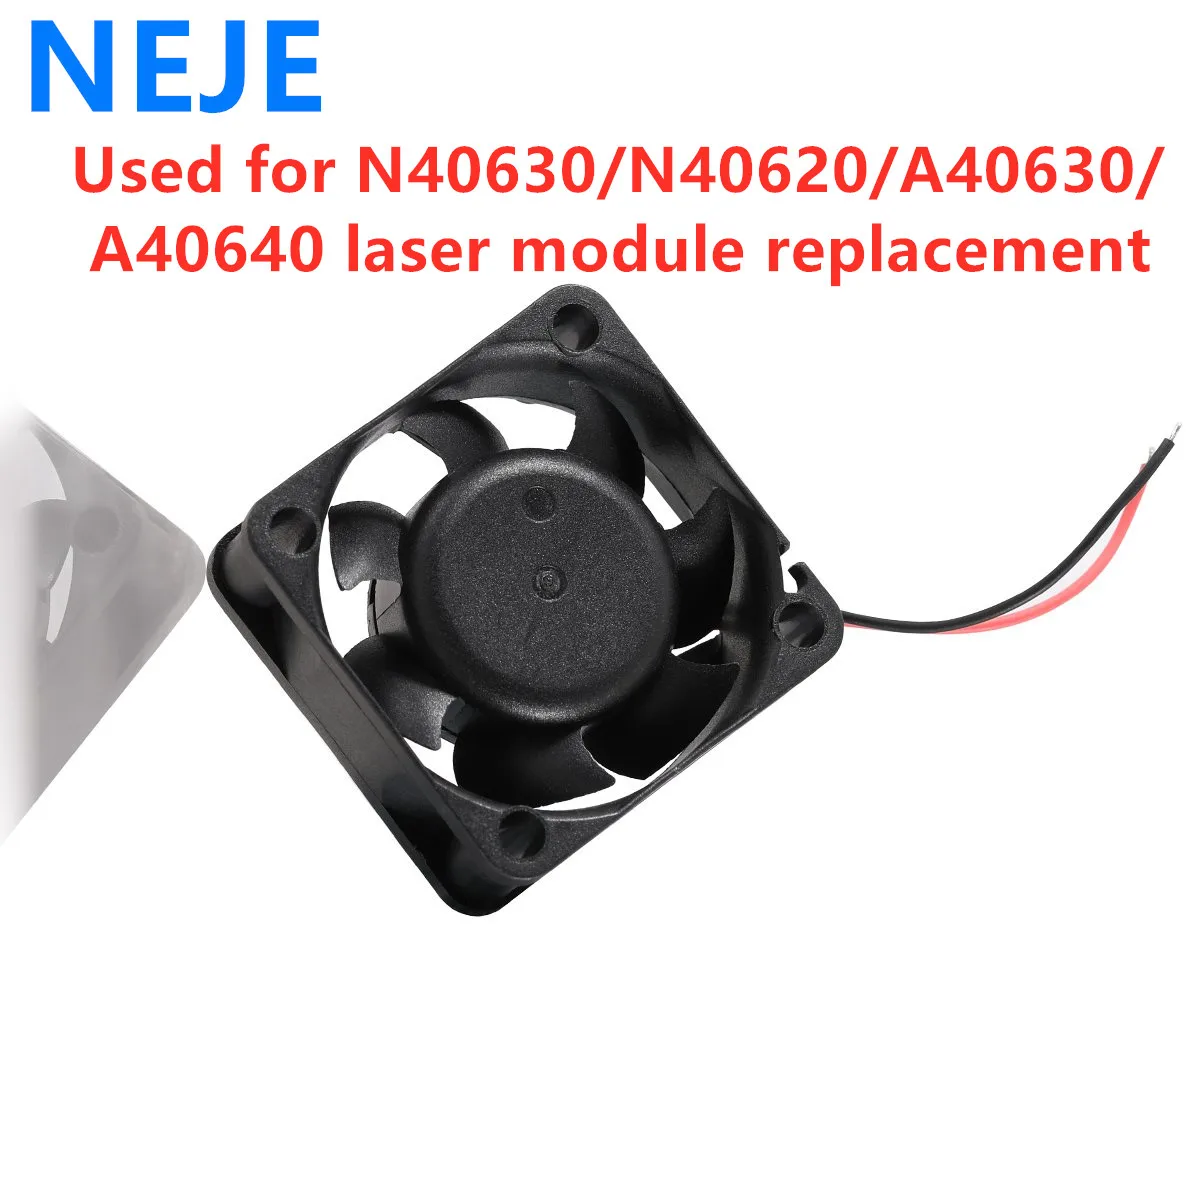 

Replacement Dual Ball 10800 RPM Cooling Fan for N40630 / N40620 / A40630 / A40640 Laser Module